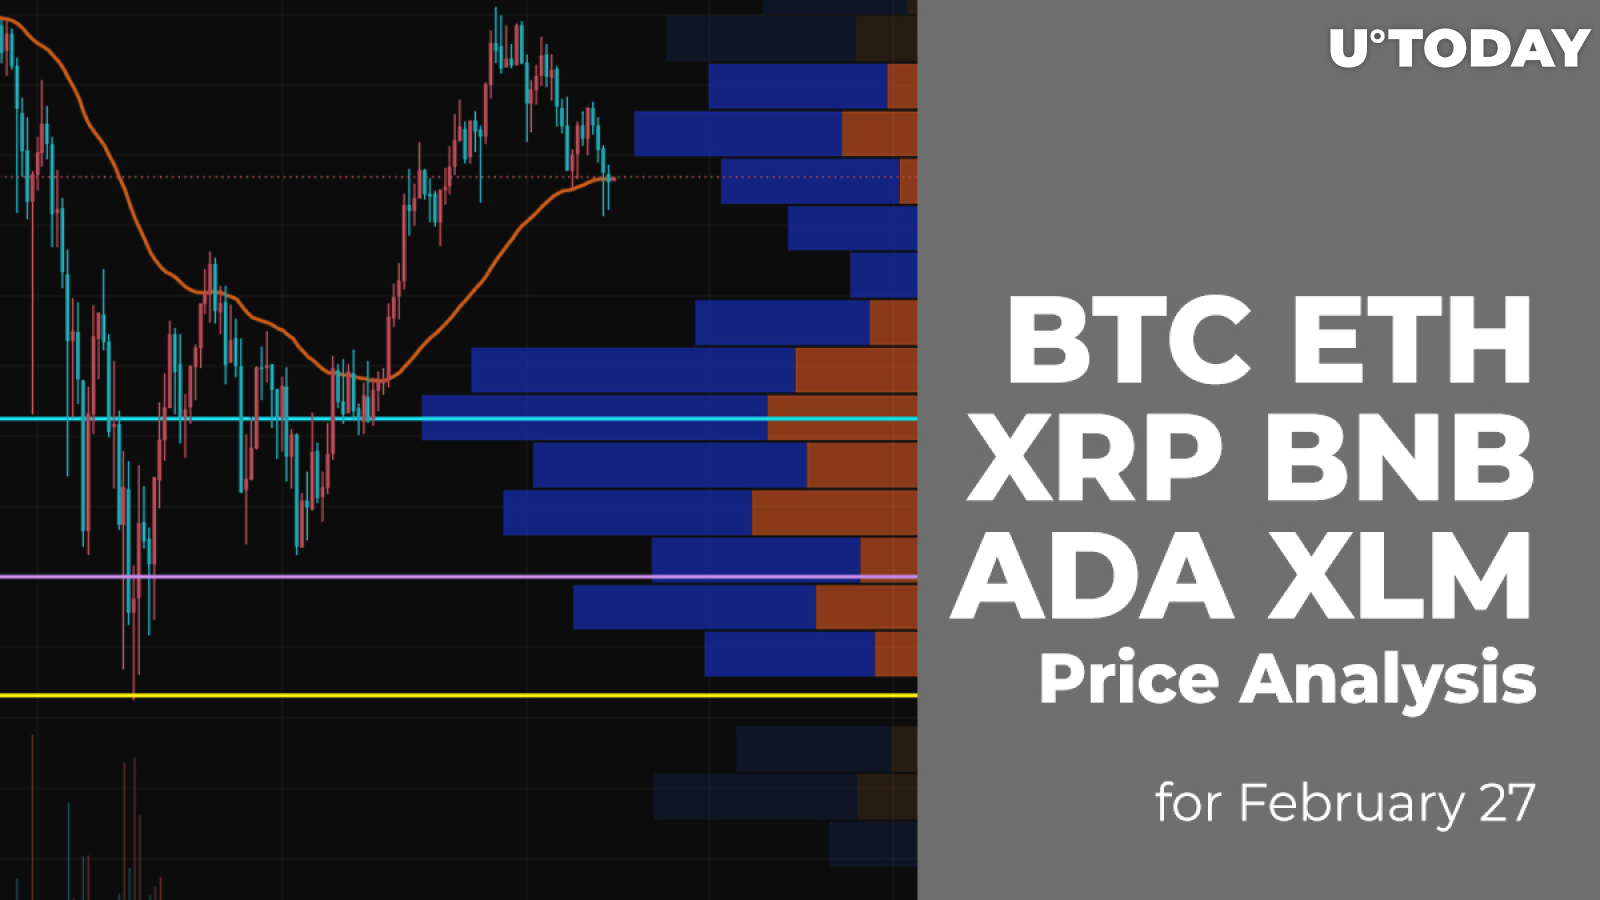 BTC, ETH, XRP, BNB, ADA and XLM Price Analysis for February 27